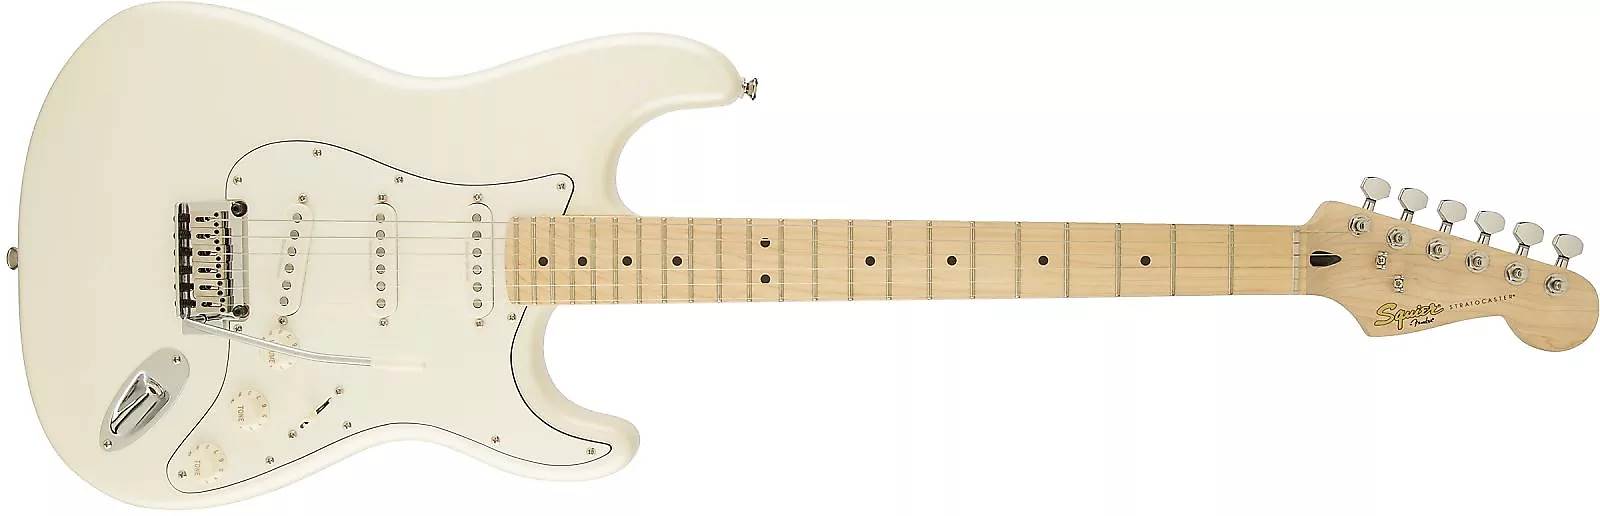 Detail Squier Deluxe Stratocaster Nomer 5